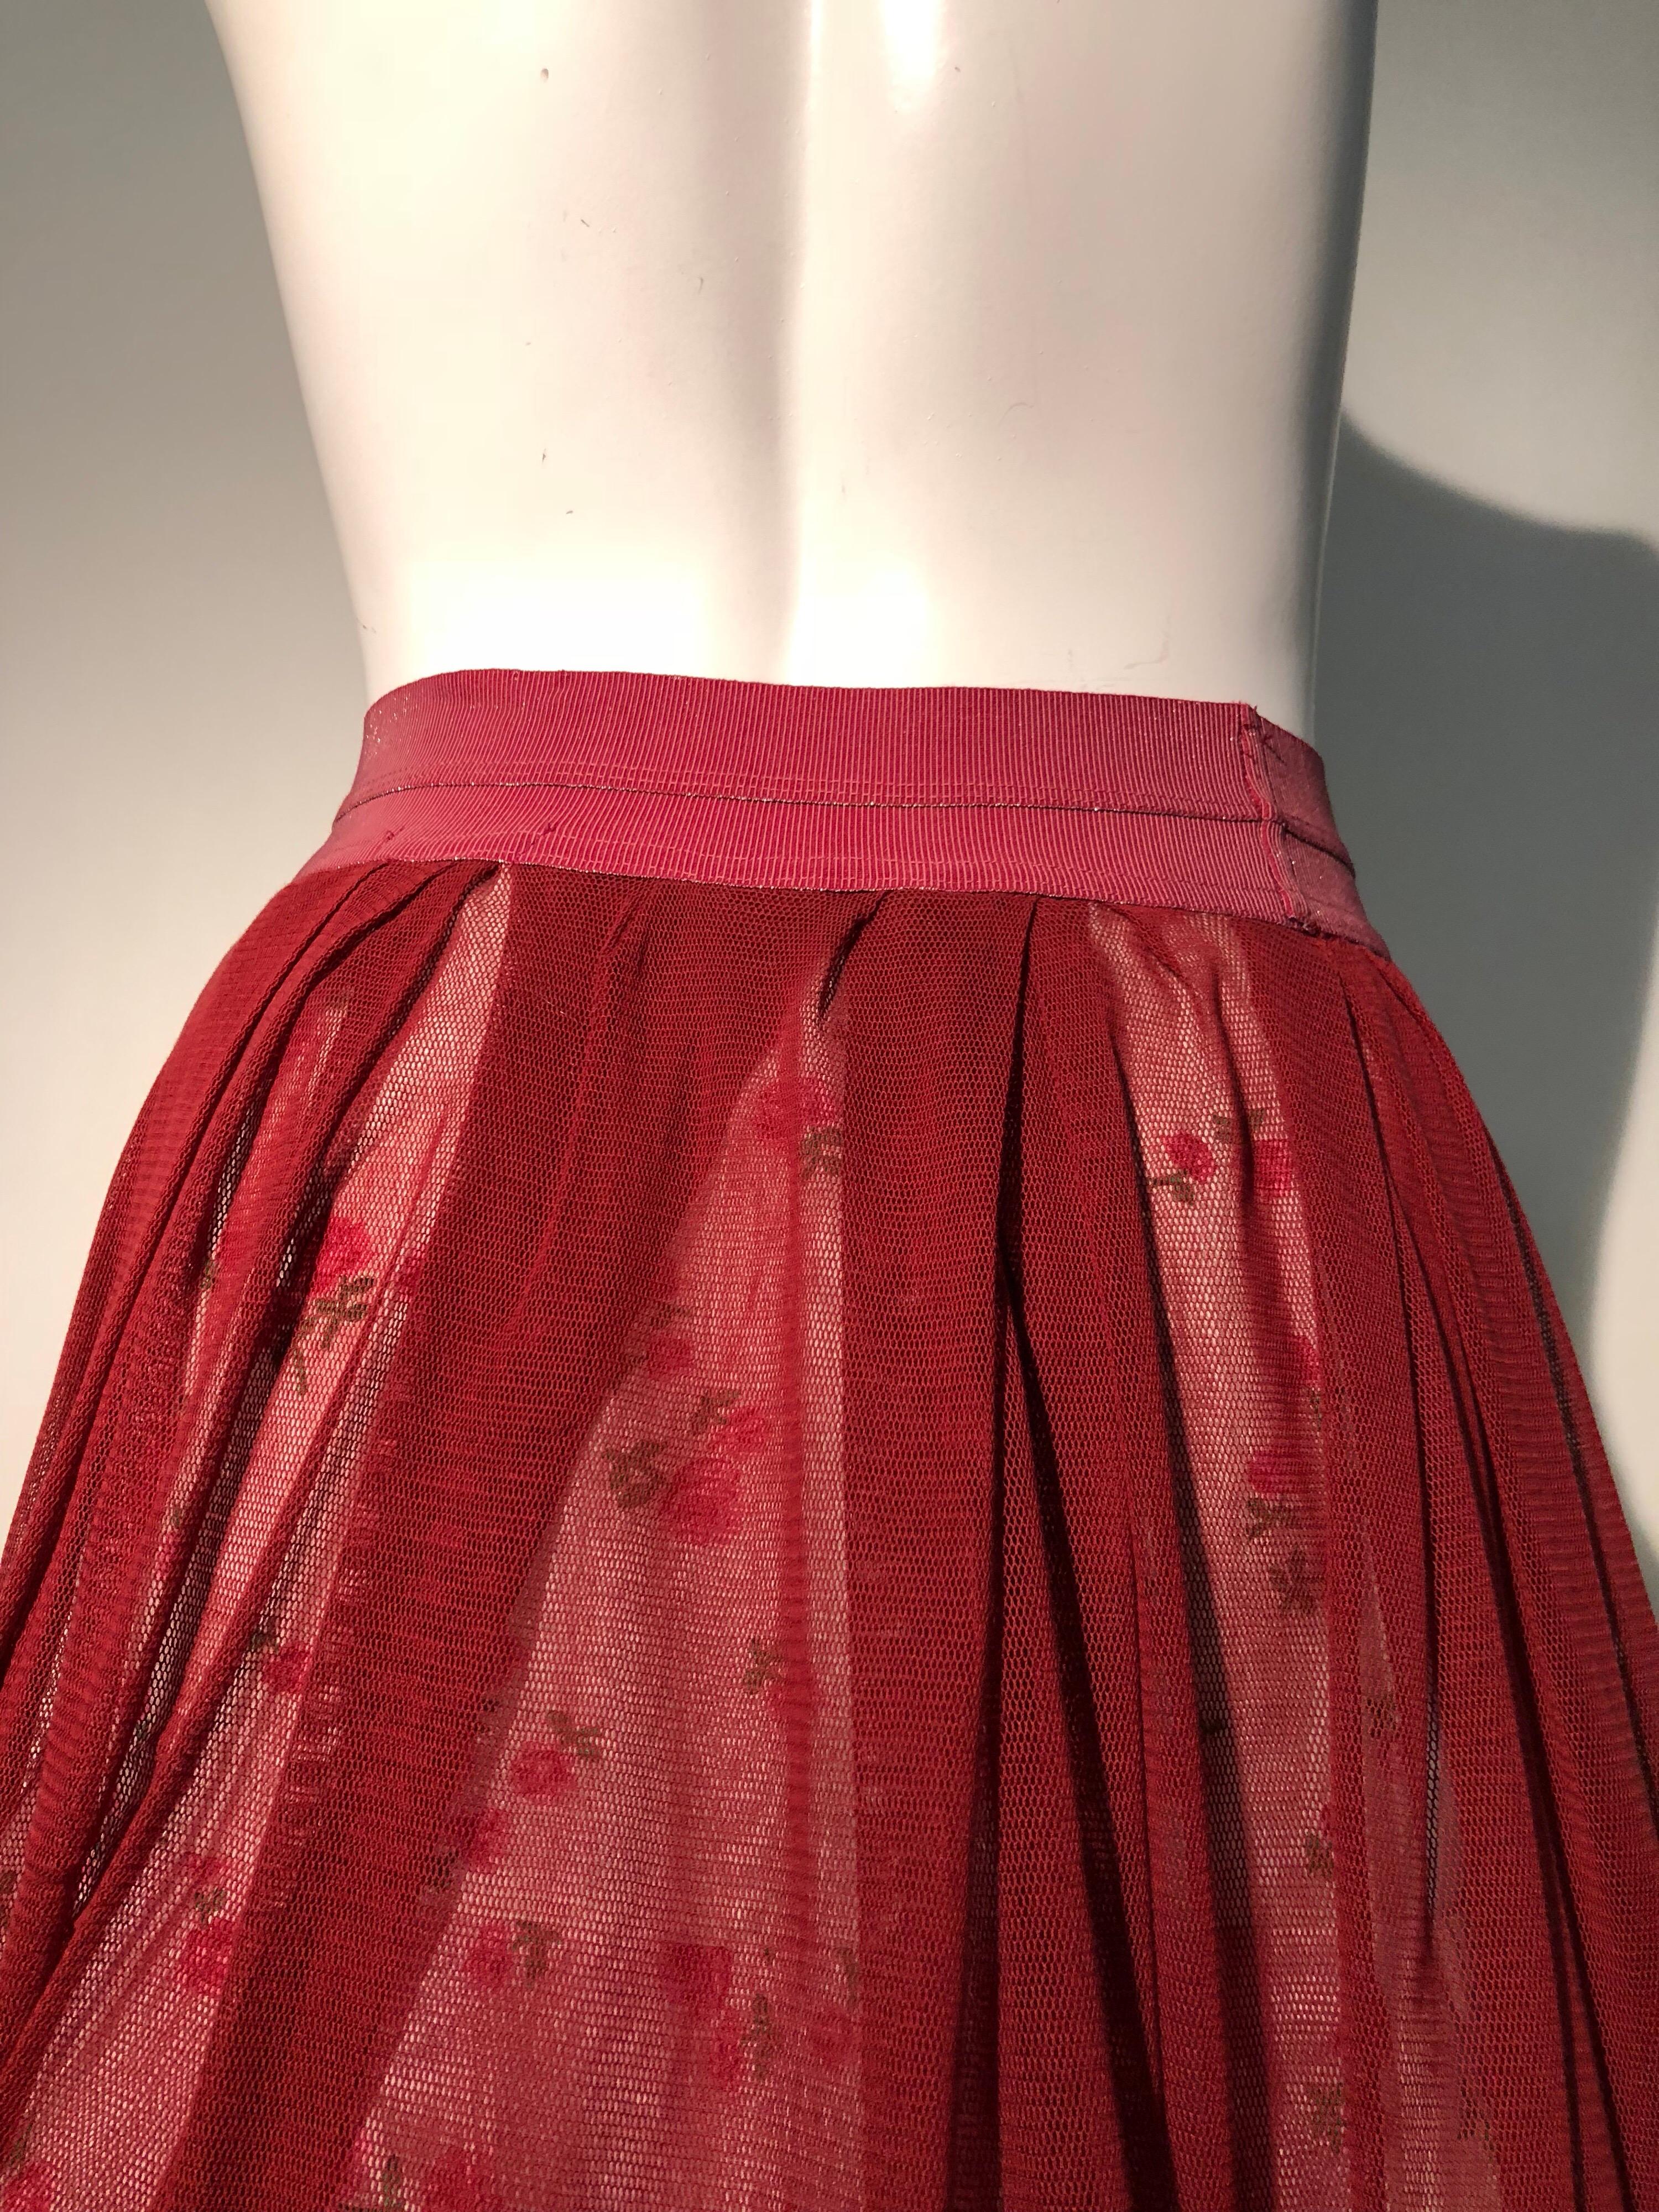 Torso Creations Reconstructed Multi-Layered Petticoat Skirt In Burgundy & Floral 3